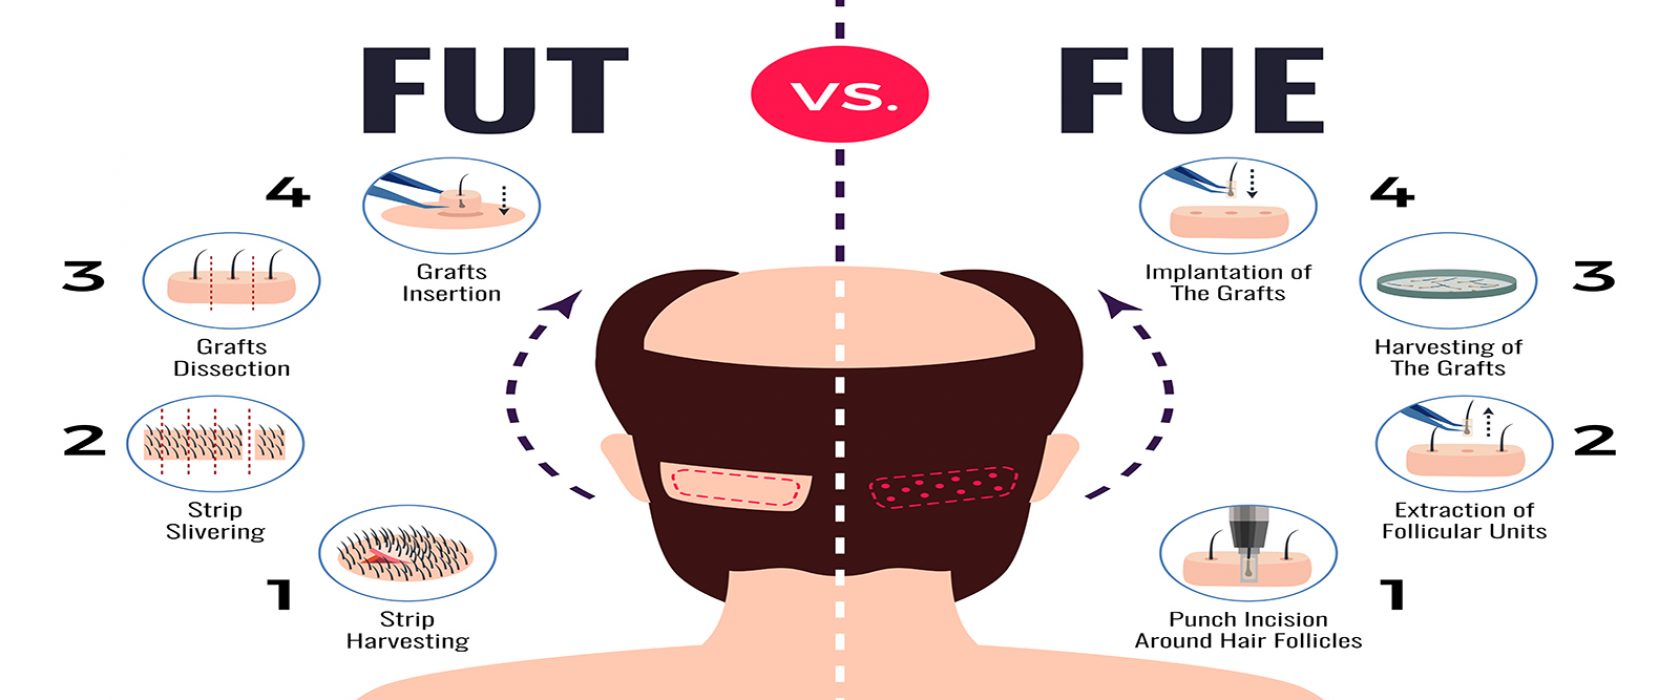 Methods of hair transplantation fut vs fue poster with infographic elements on white background vector illustration